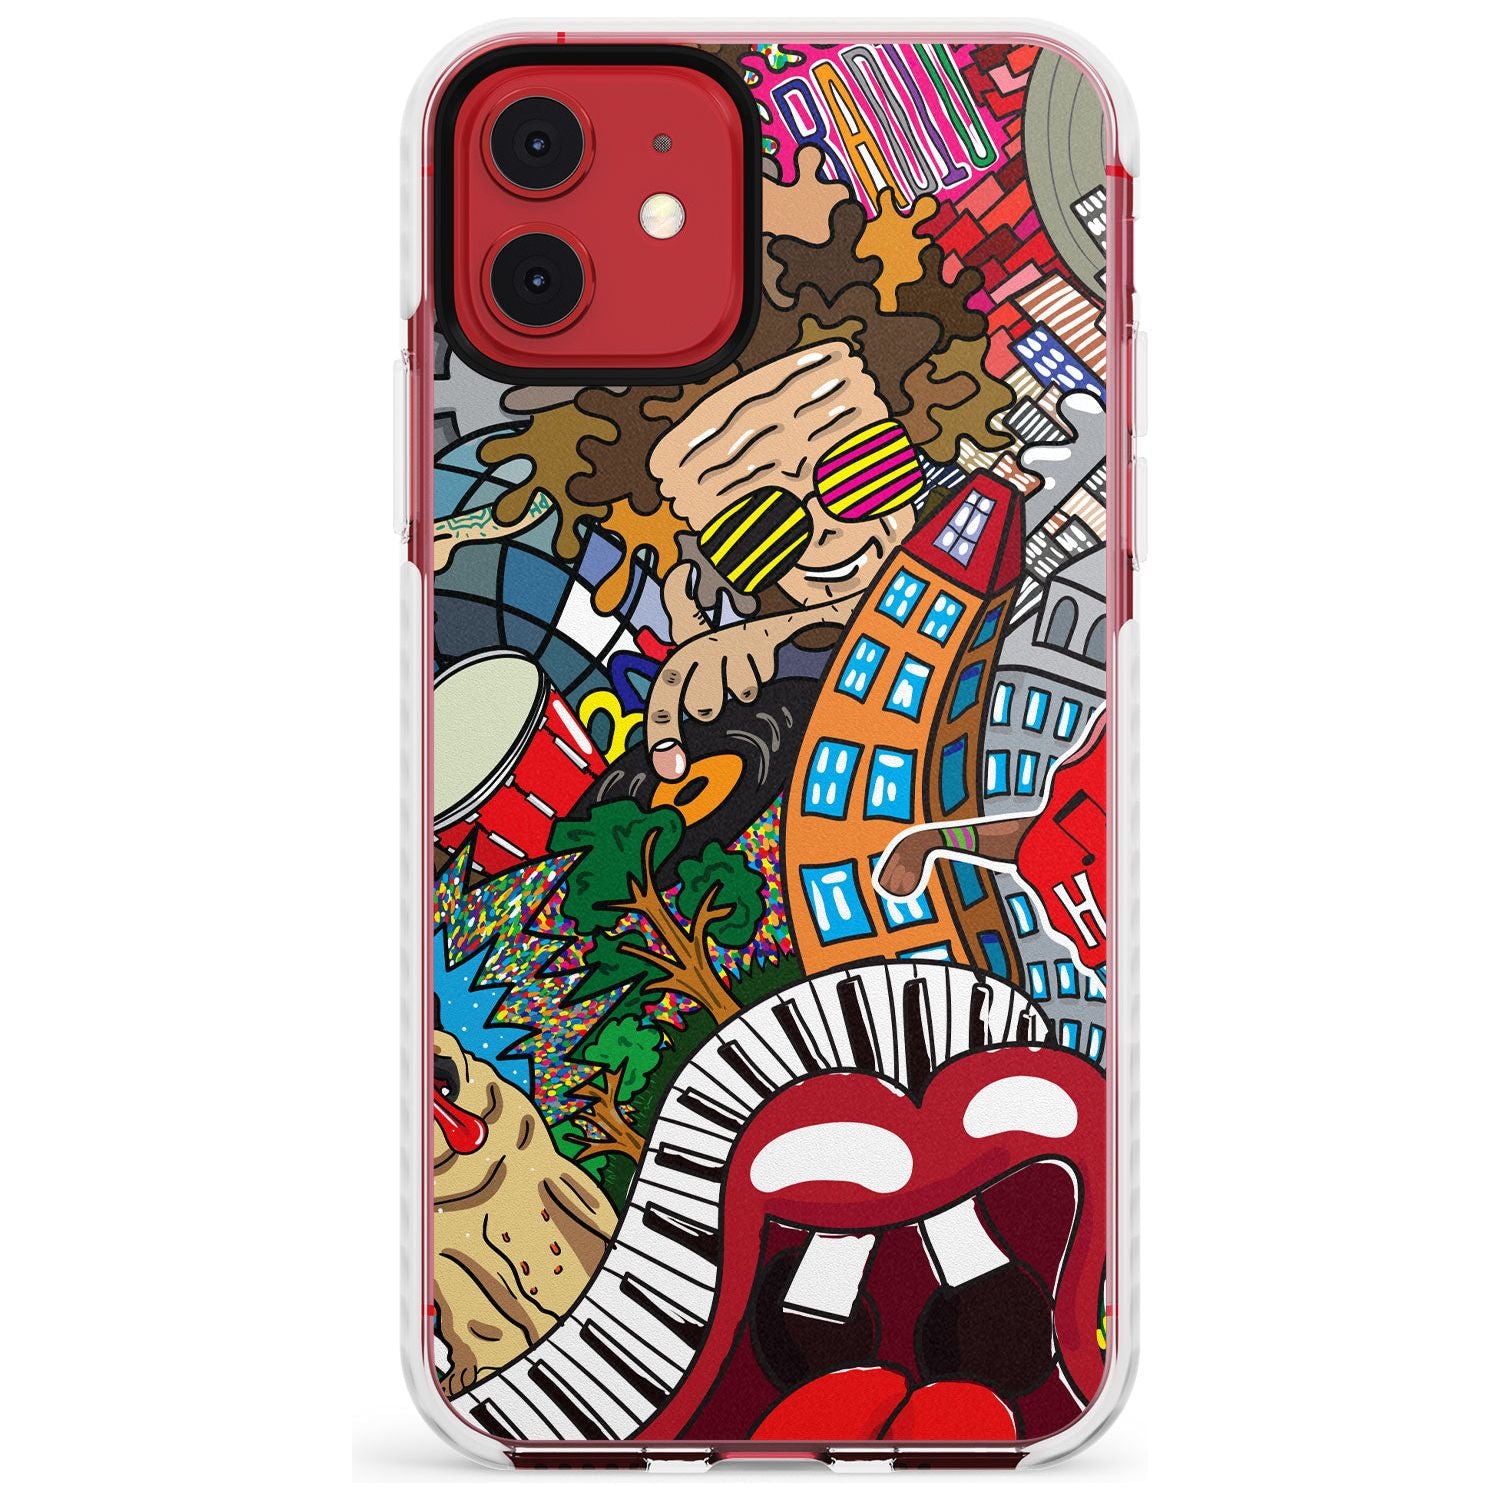 Noise Complaint Slim TPU Phone Case for iPhone 11